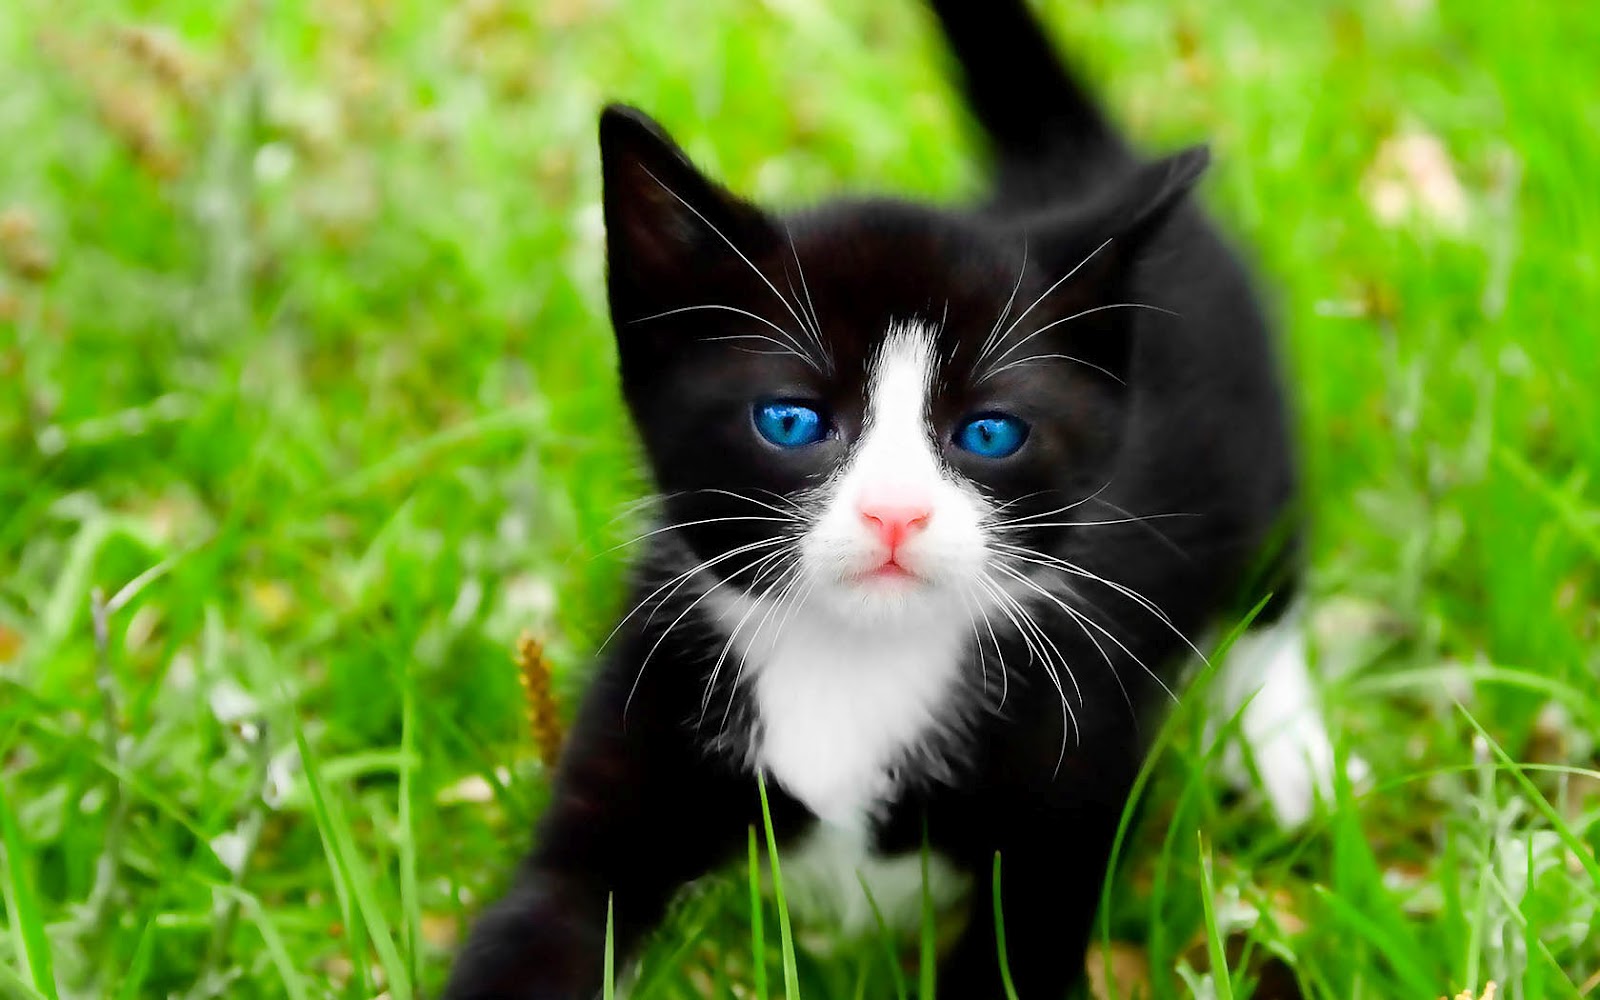 HD Cat Wallpaper With A Black On The Grass Cats